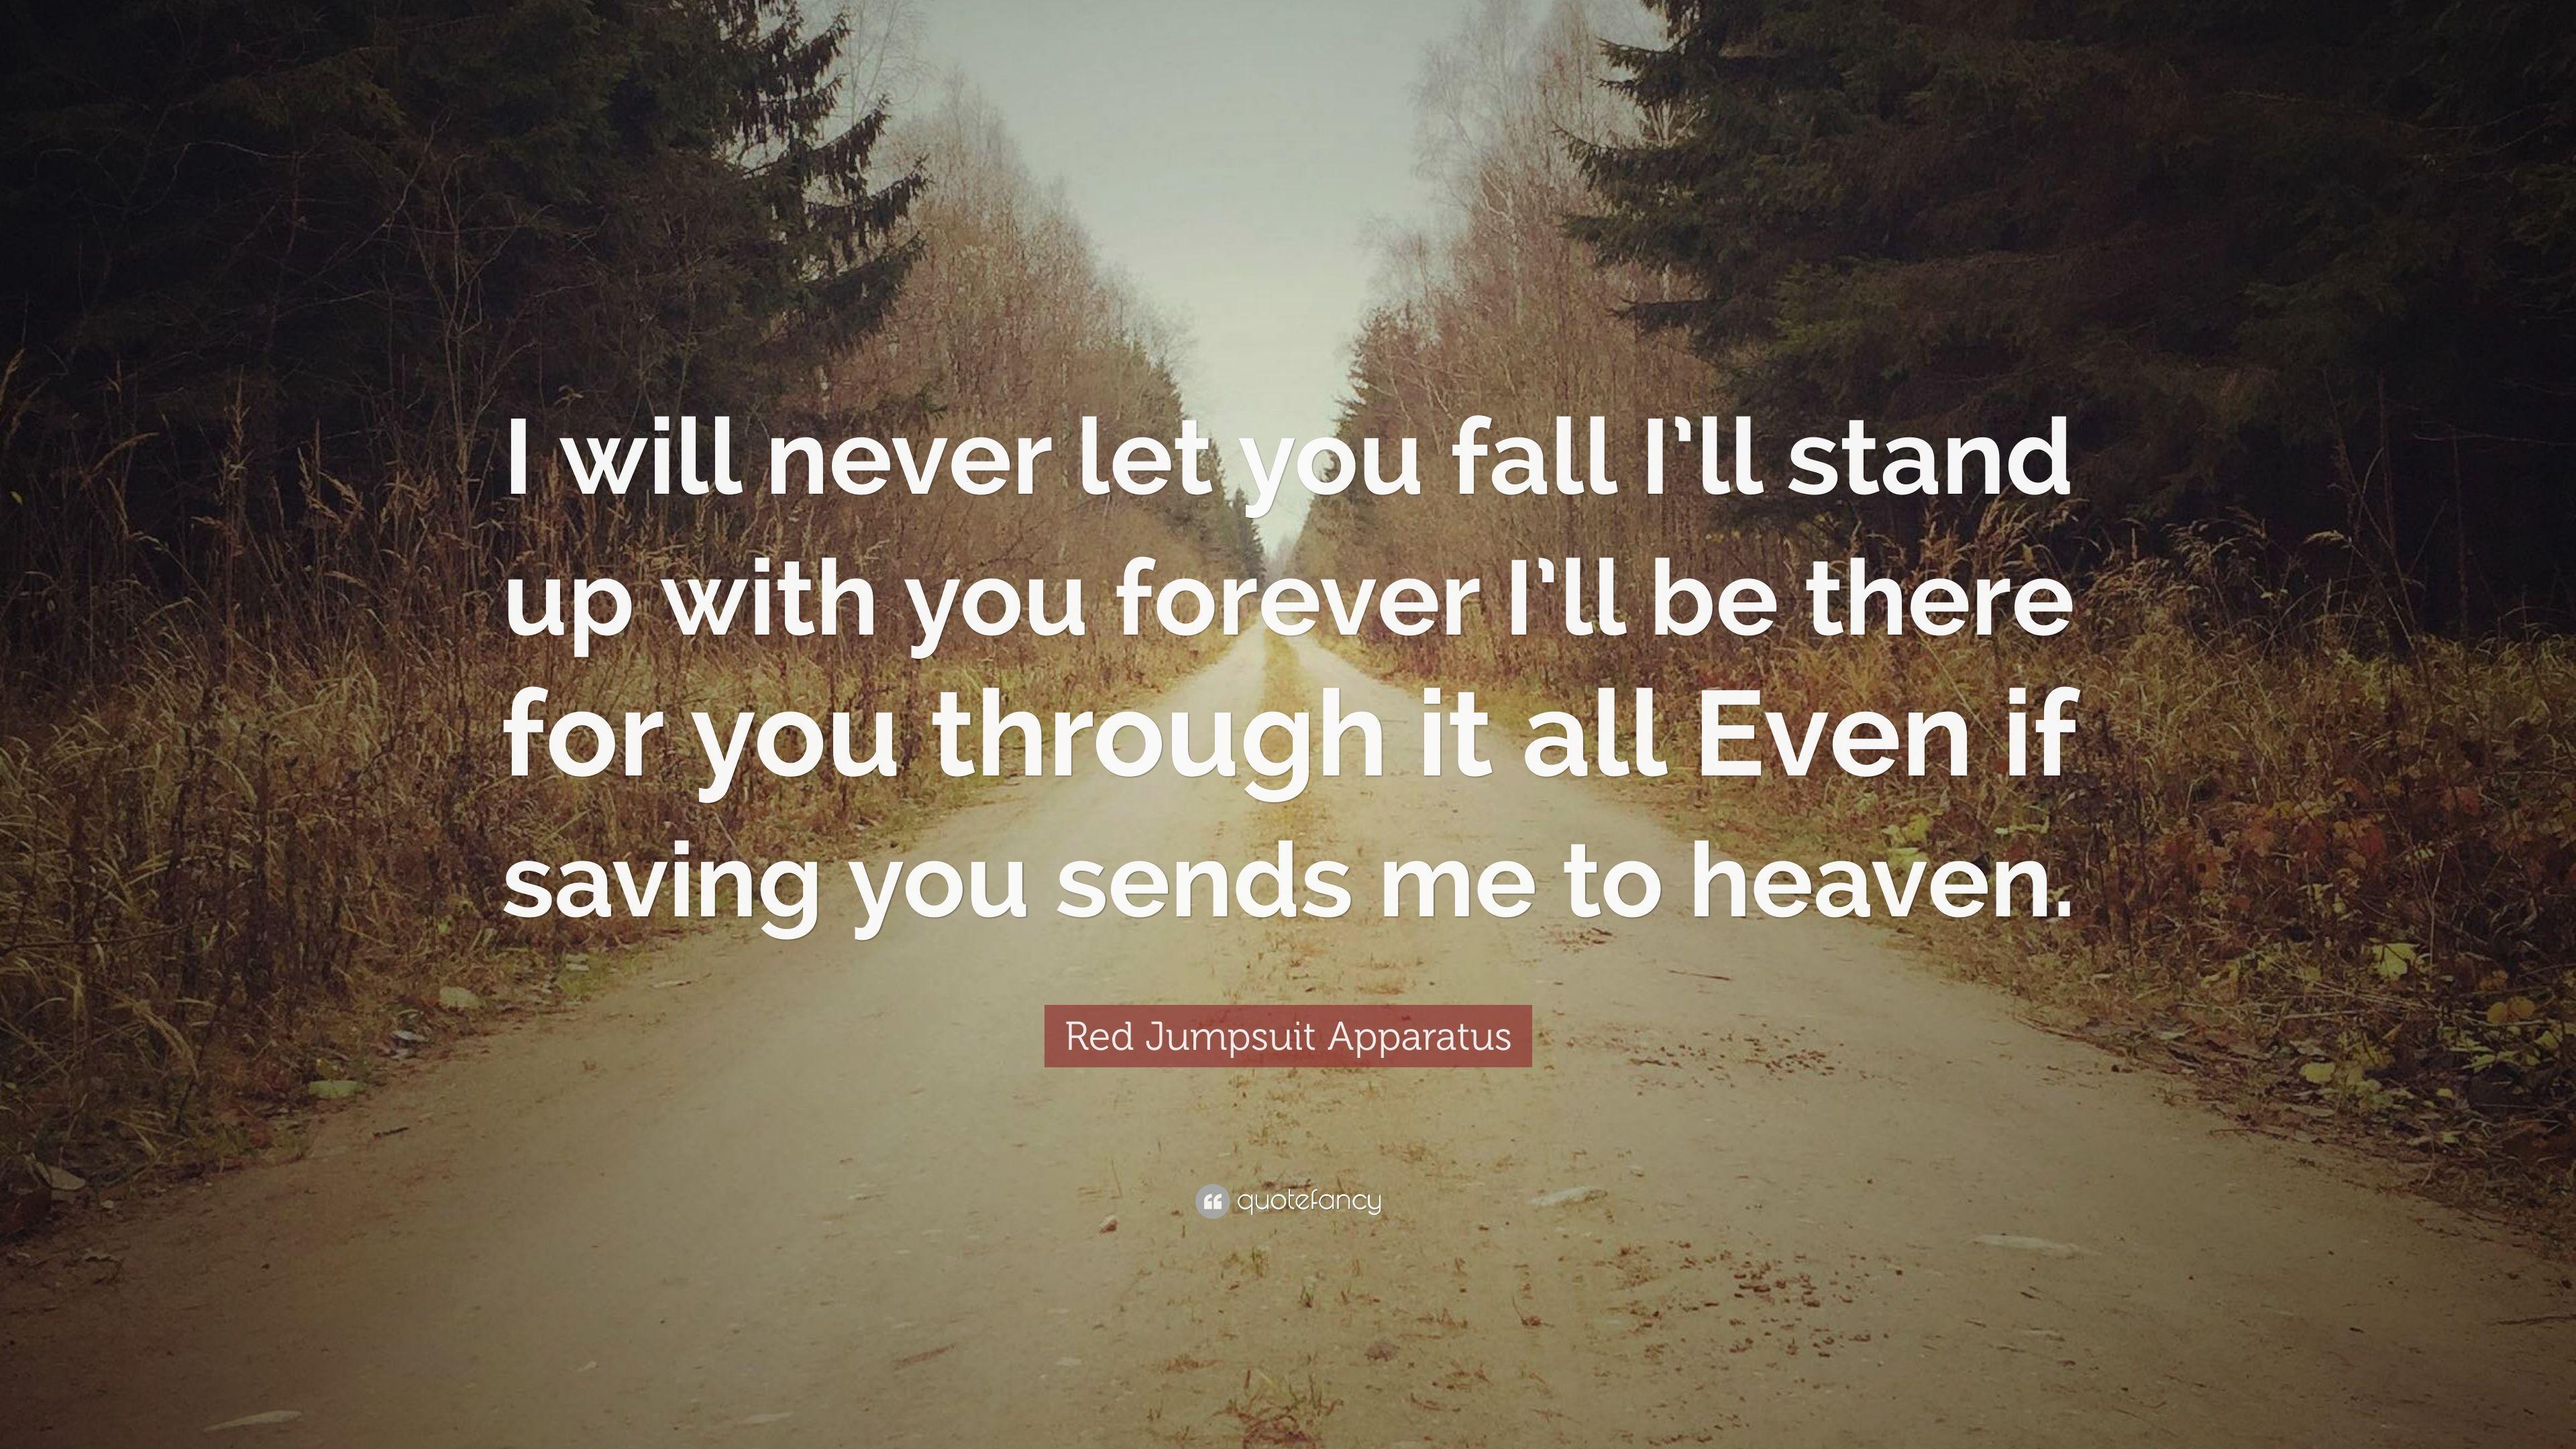 Red Jumpsuit Apparatus Quote: “I will never let you fall I'll